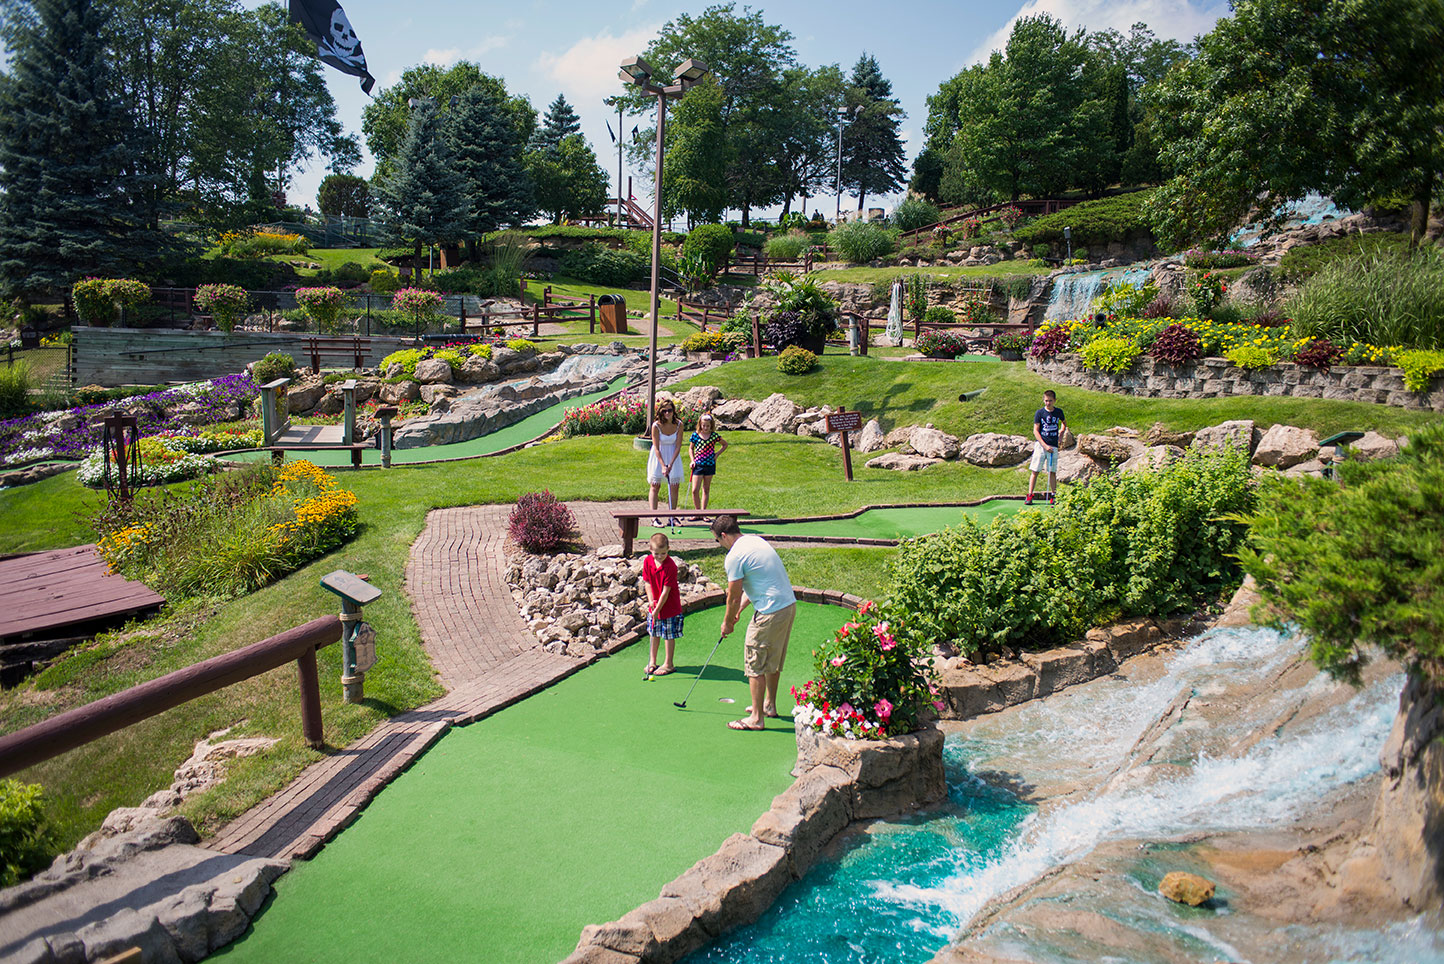 people playing mini golf in a miniature golf course